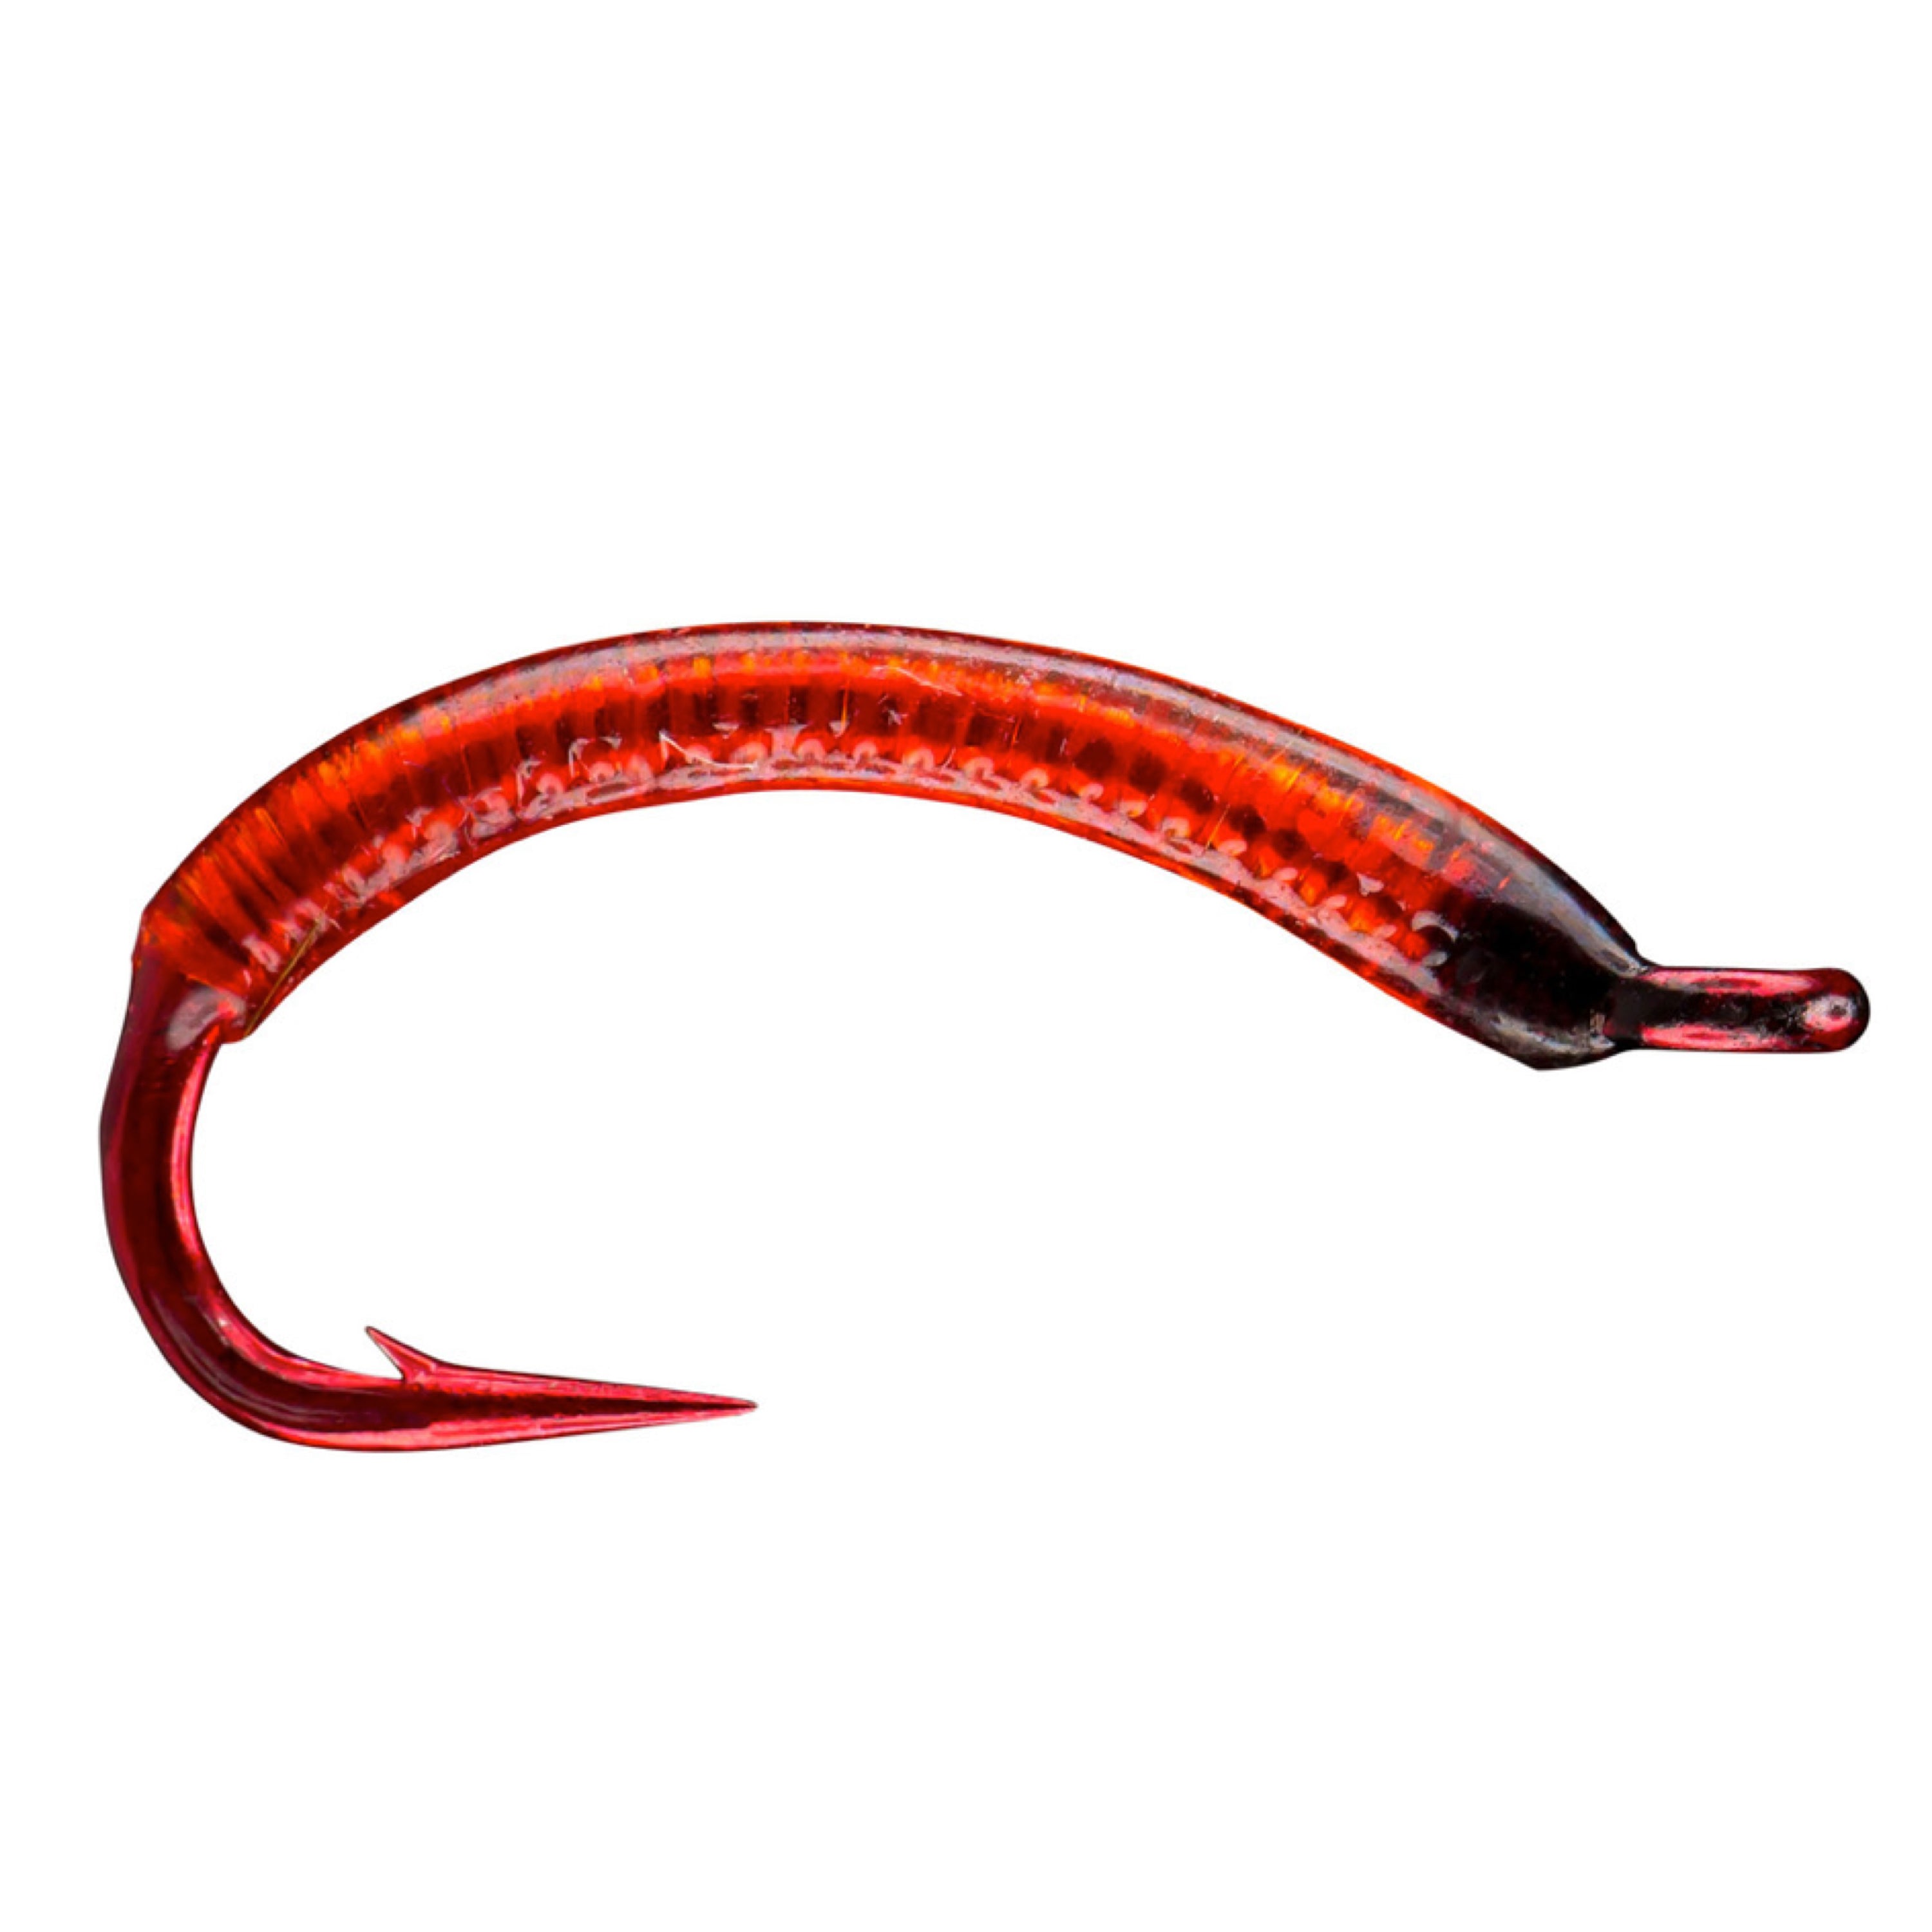 Rio Bloodworm - 12 Pack